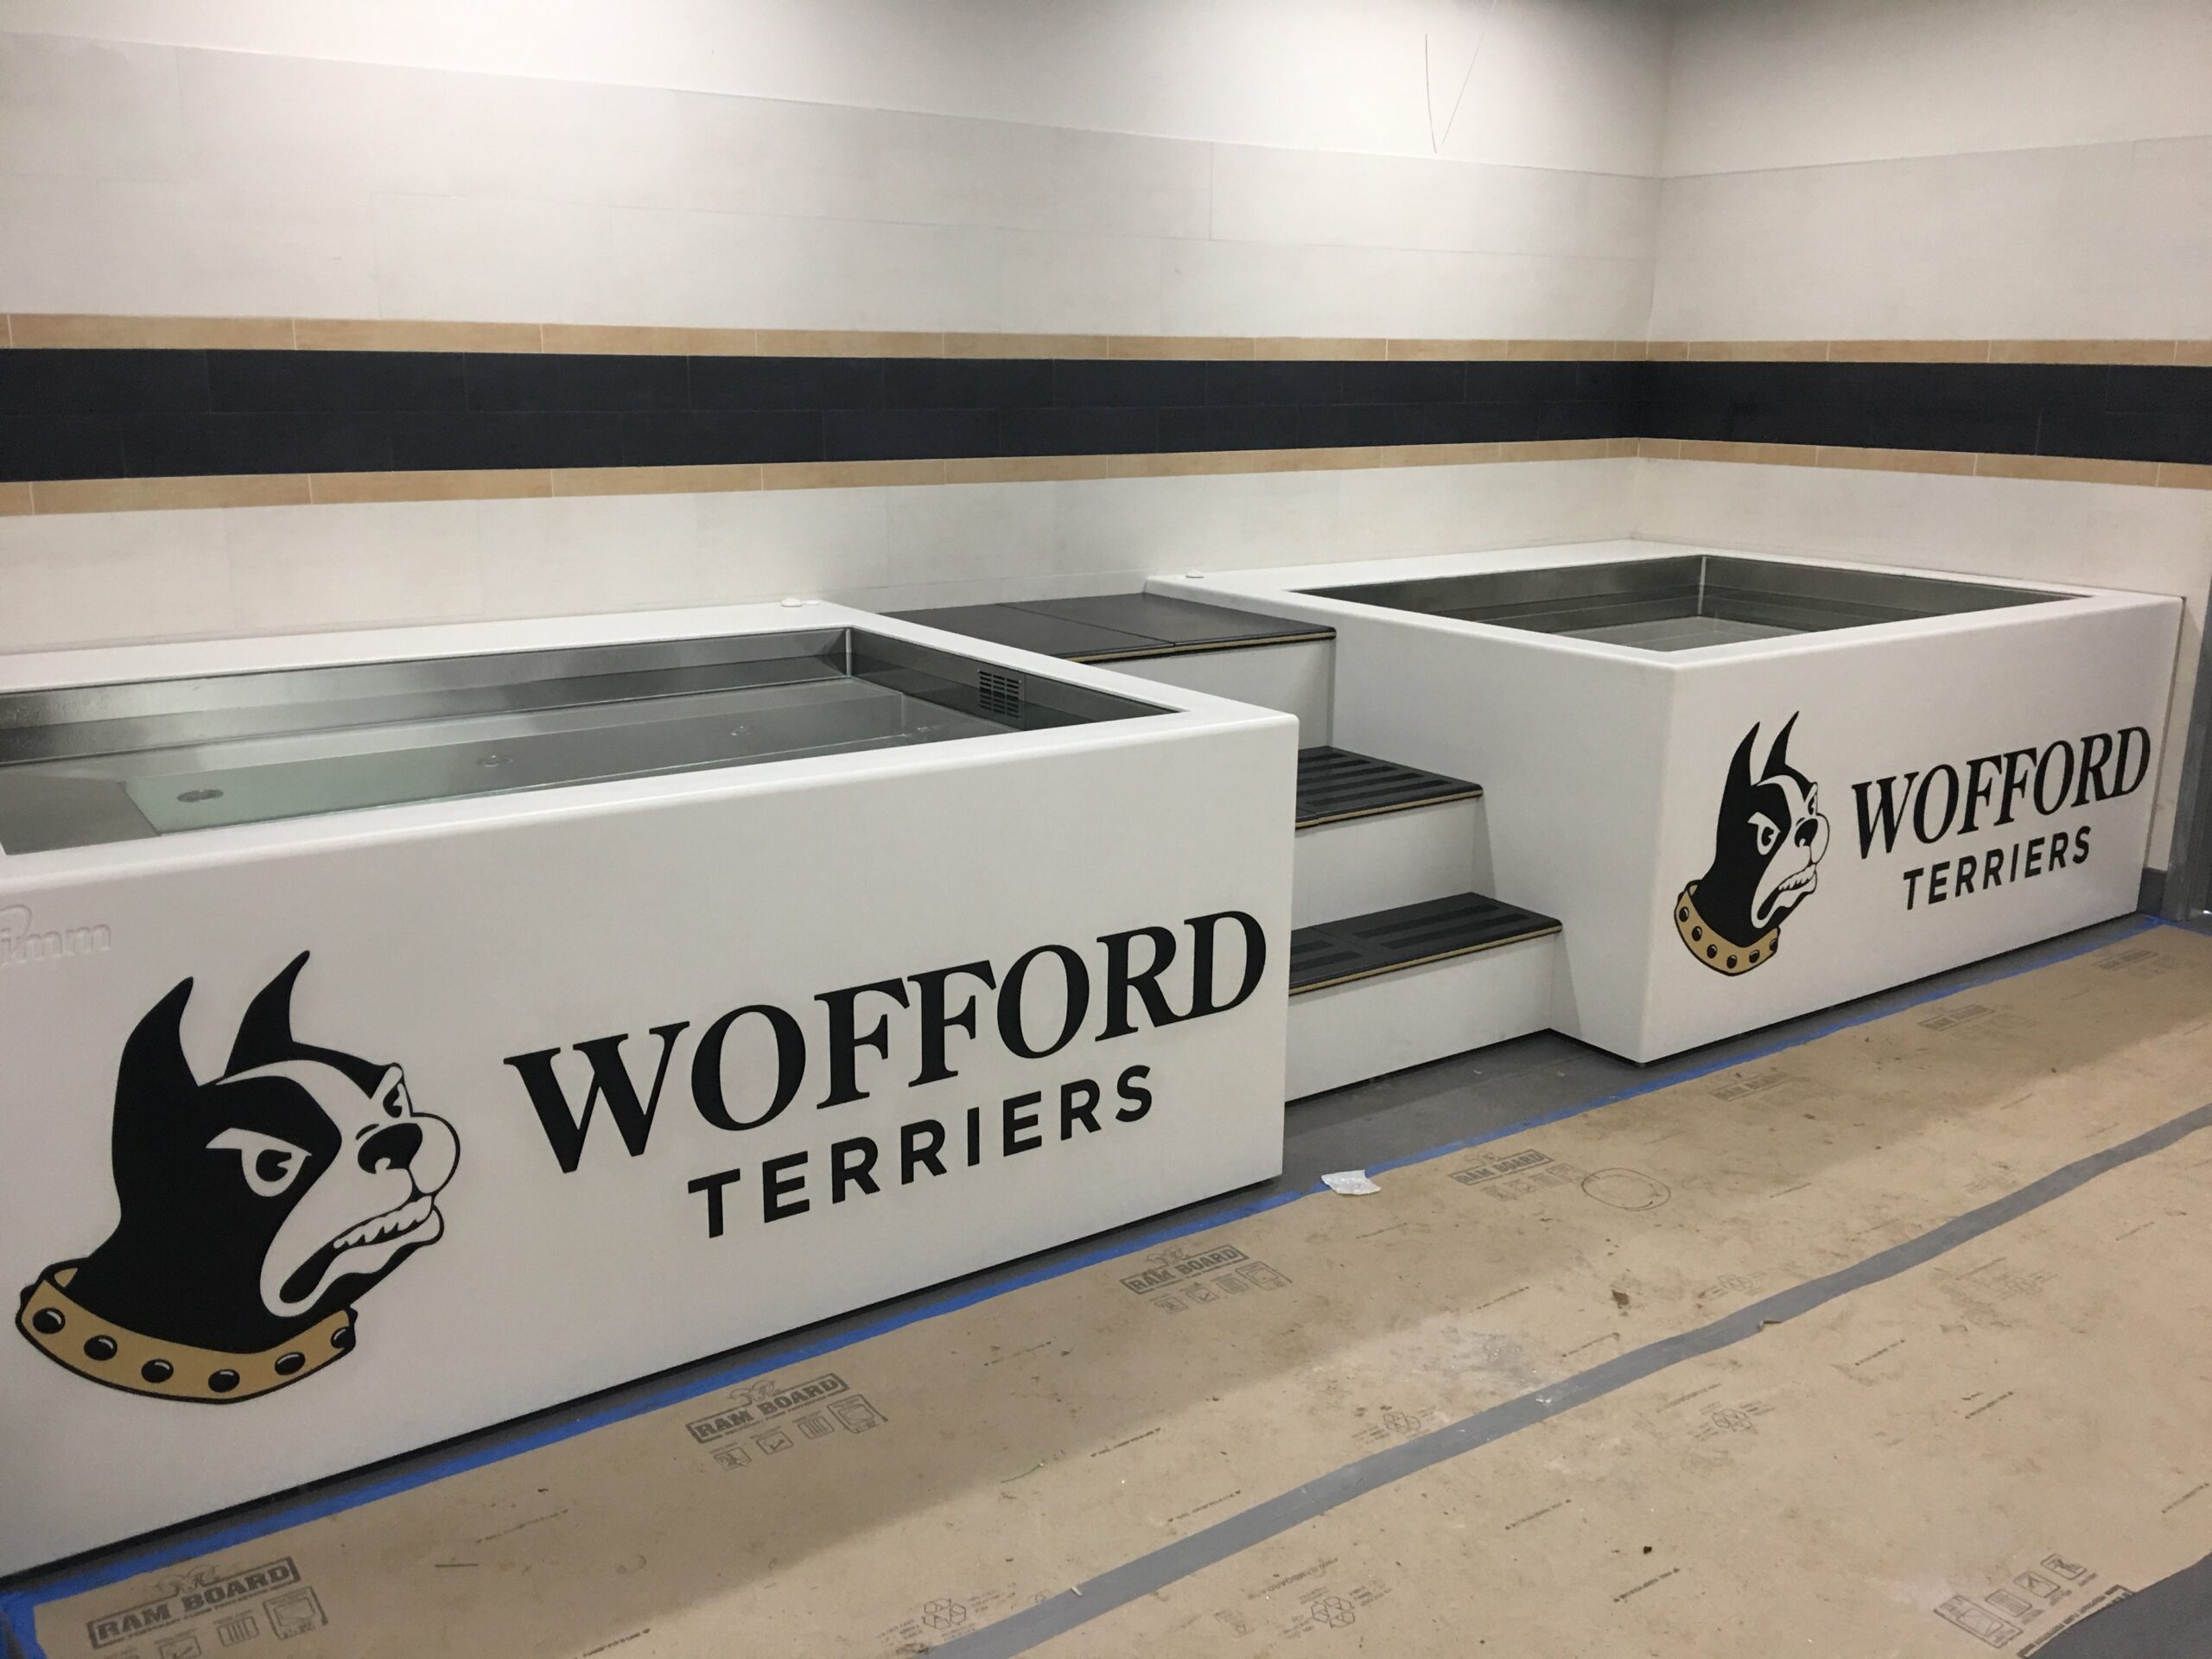 Wofford Terriers CRYOTherm 4942 hydrotherapy system